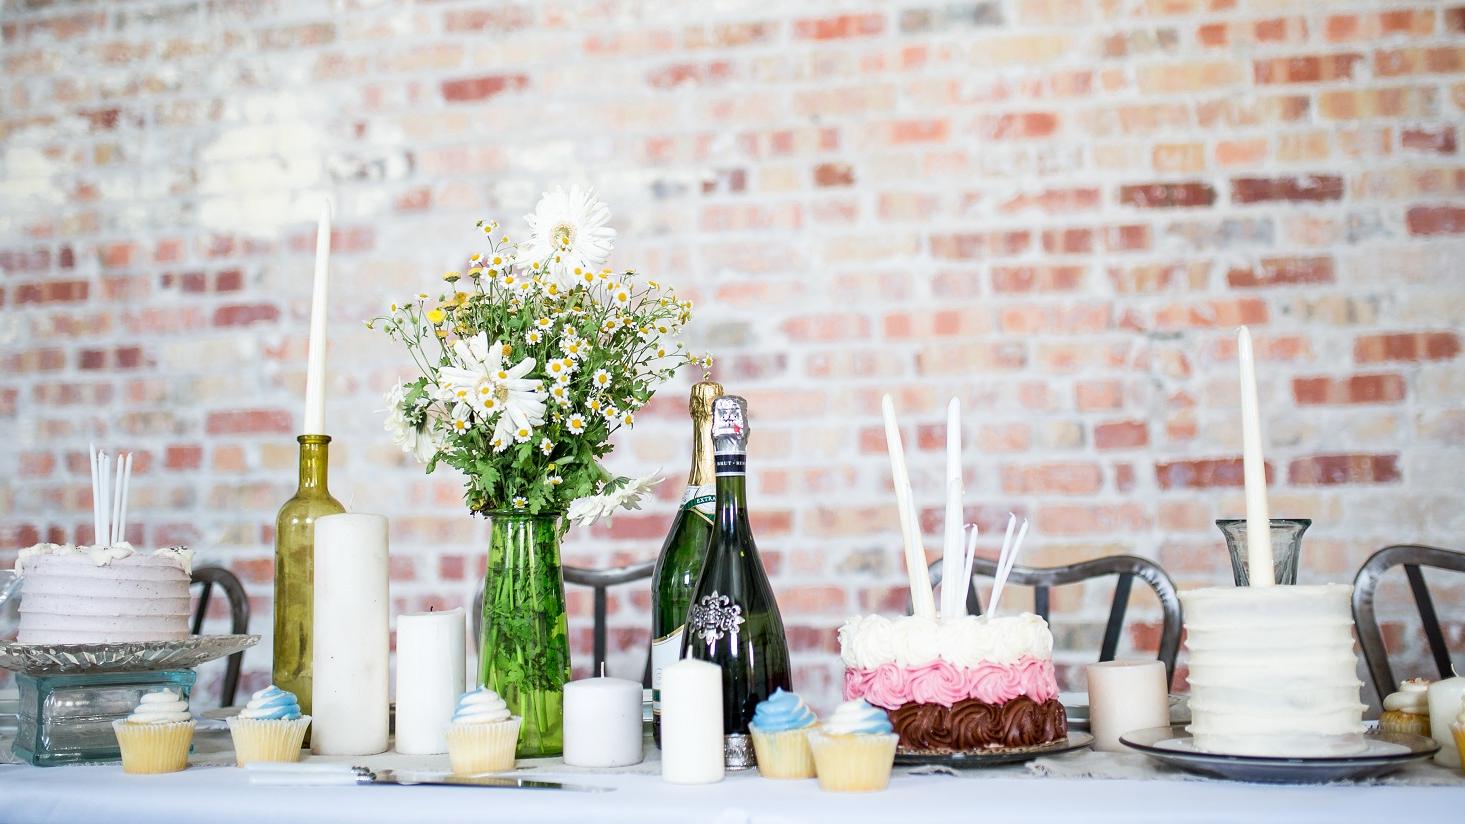 Find your Birthday Party Venue in Sydney